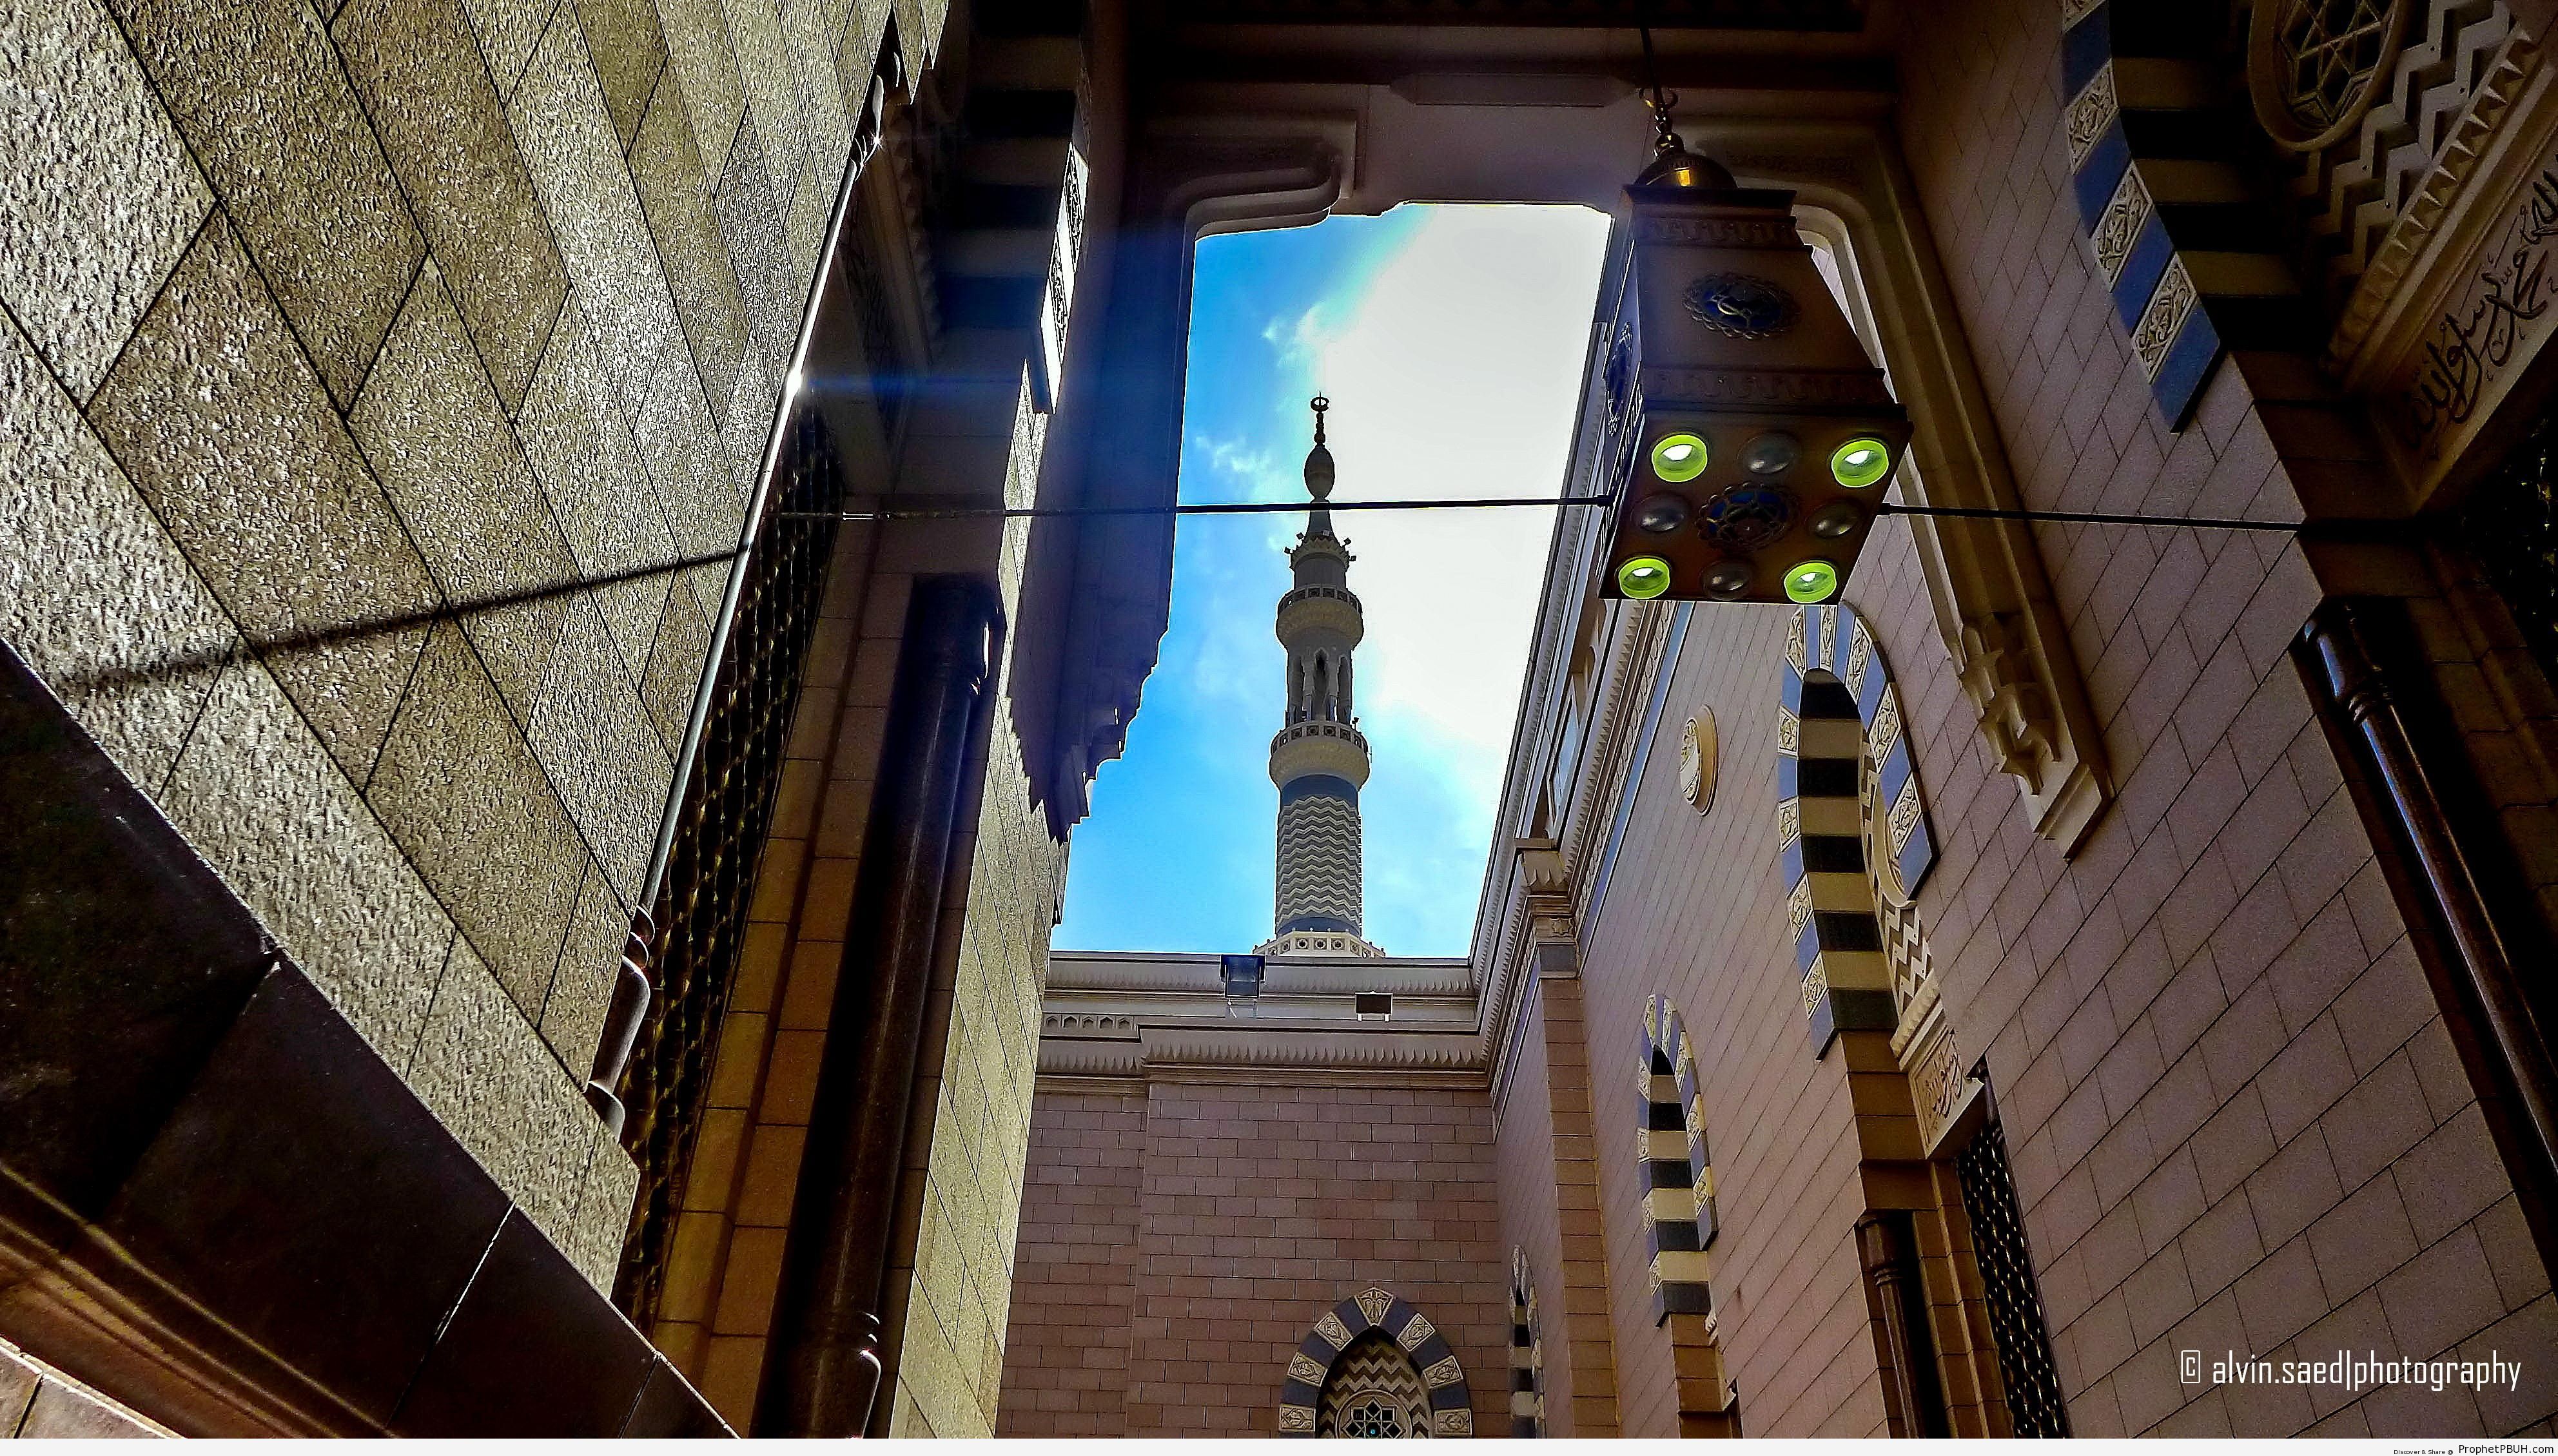 Peaceful Alley by the Gate of Abu Dhar (Inside Mosque of the Prophet in Madinah) - Al-Masjid an-Nabawi (The Prophets Mosque) in Madinah, Saudi Arabia